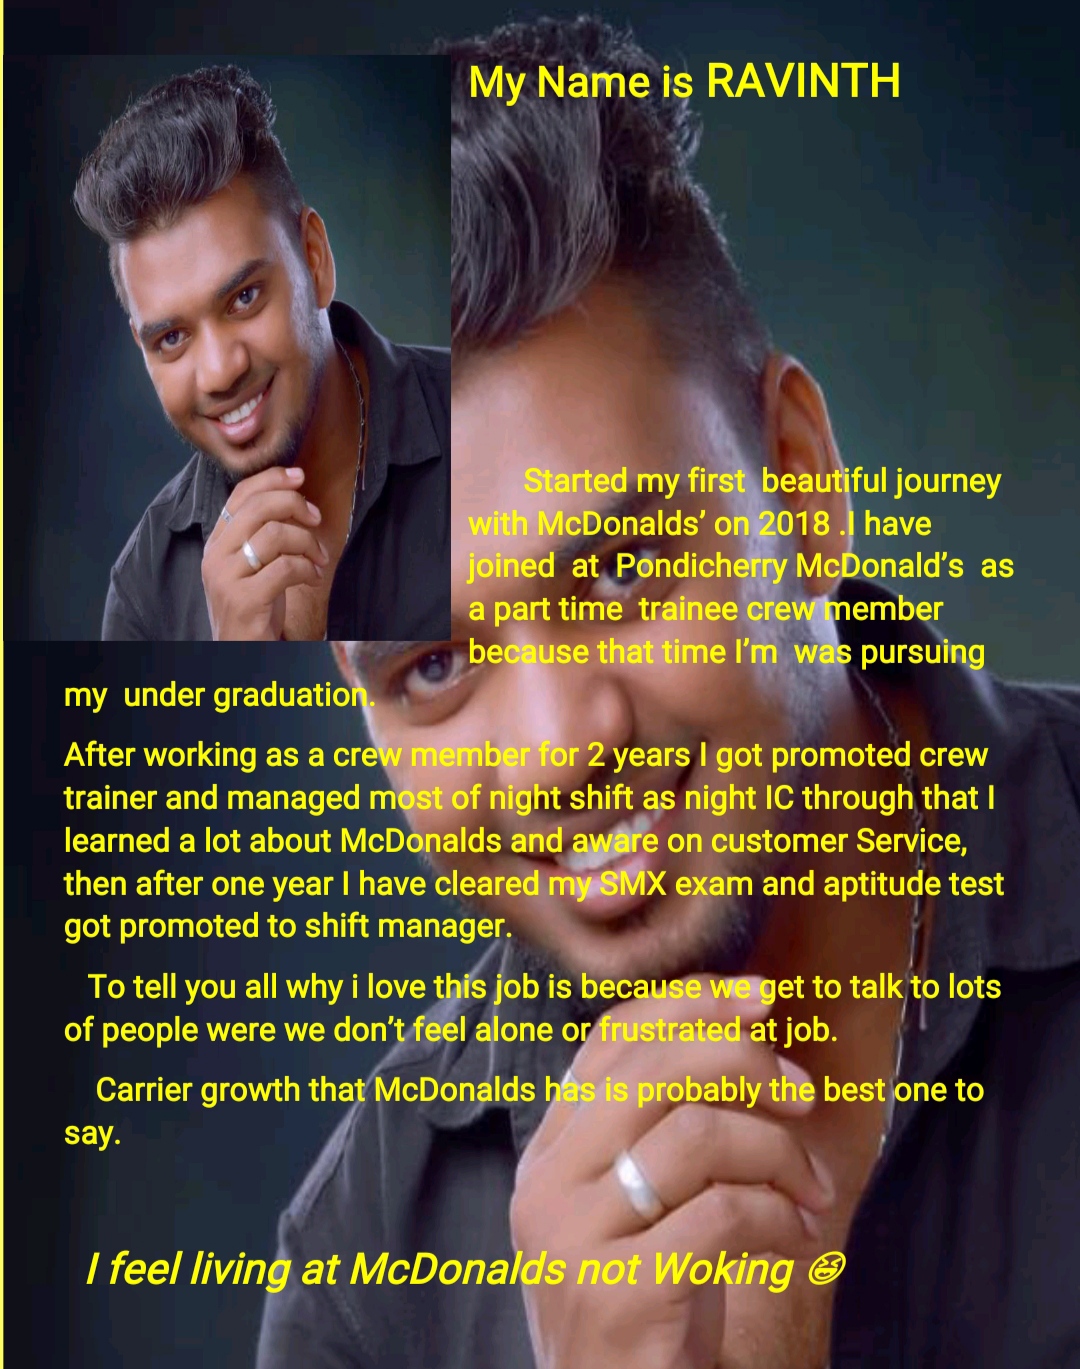 My Name is RAVINTH

SN U

EY

   
  
  
   

beautiful journey

my under graduatio

After working as a cre years | got promoted crew

trainer and managed night IC through that |
2 stomer Service,

then after one year | have cleal m and aptitude test

got promoted to shift manager.